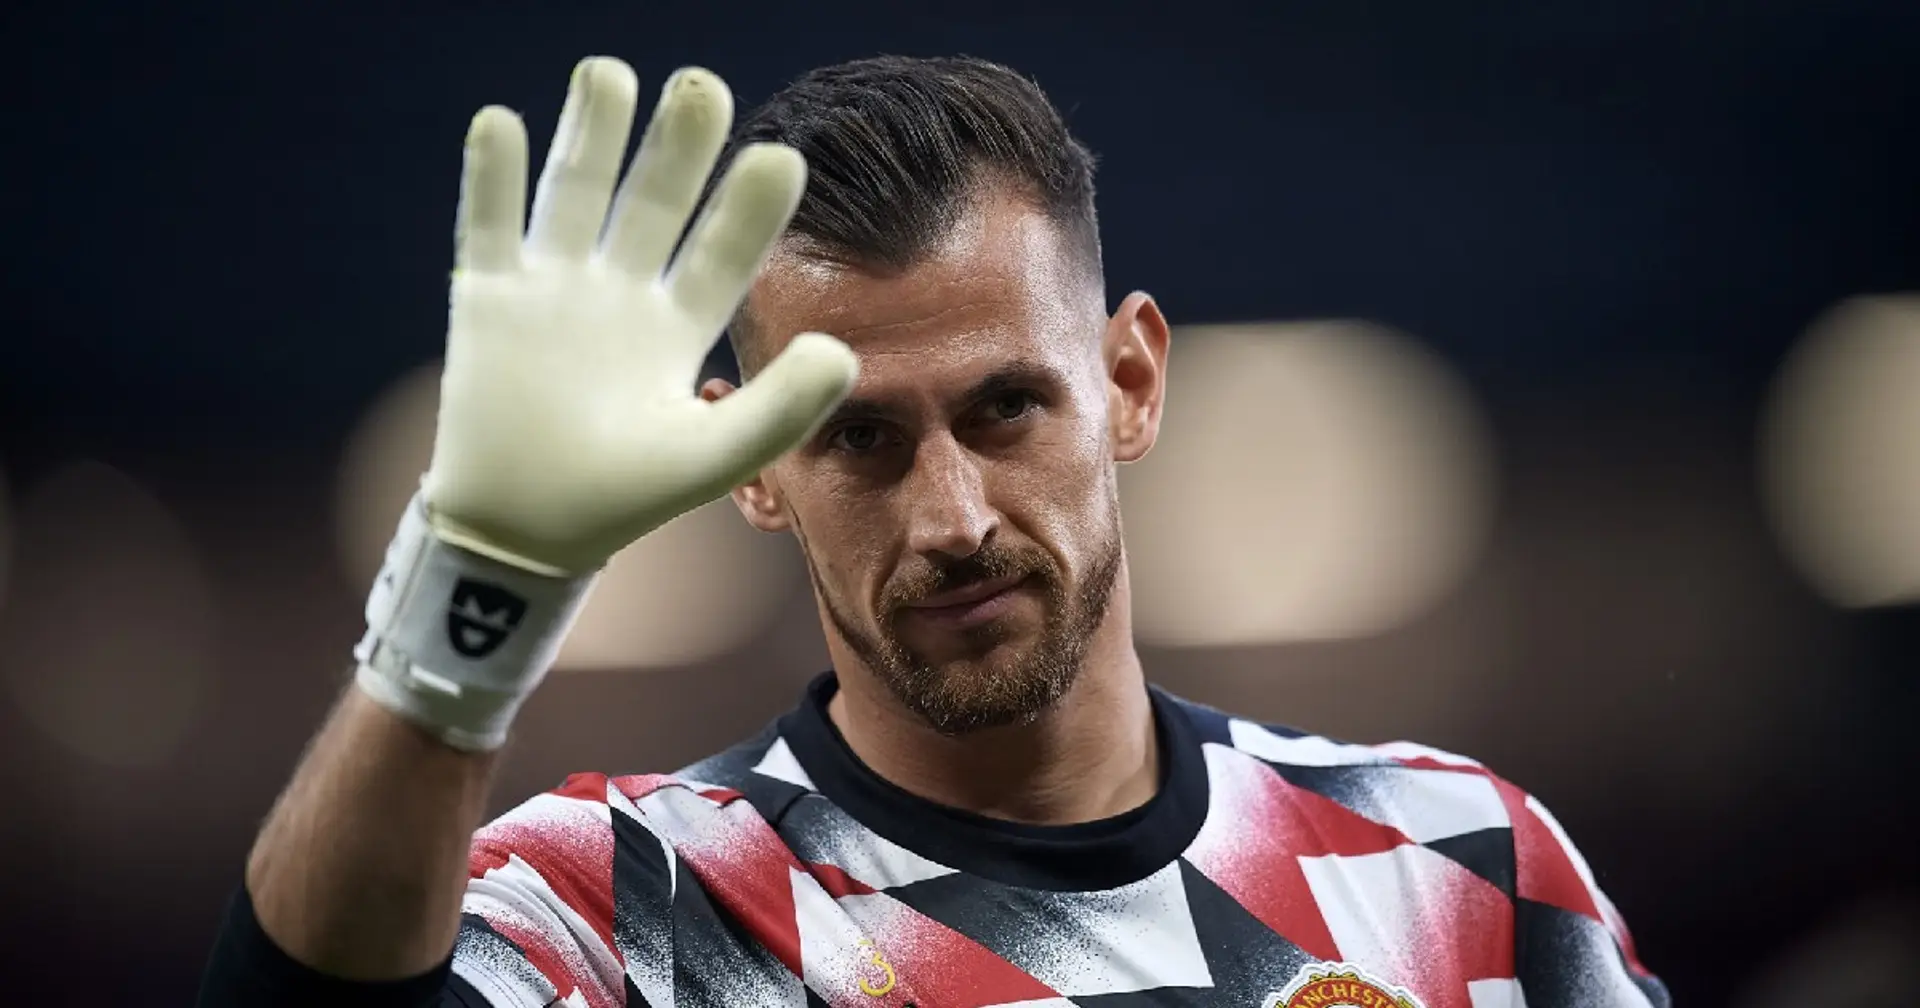 'Newcastle is my home': Dubravka breaks silence after Man United exit